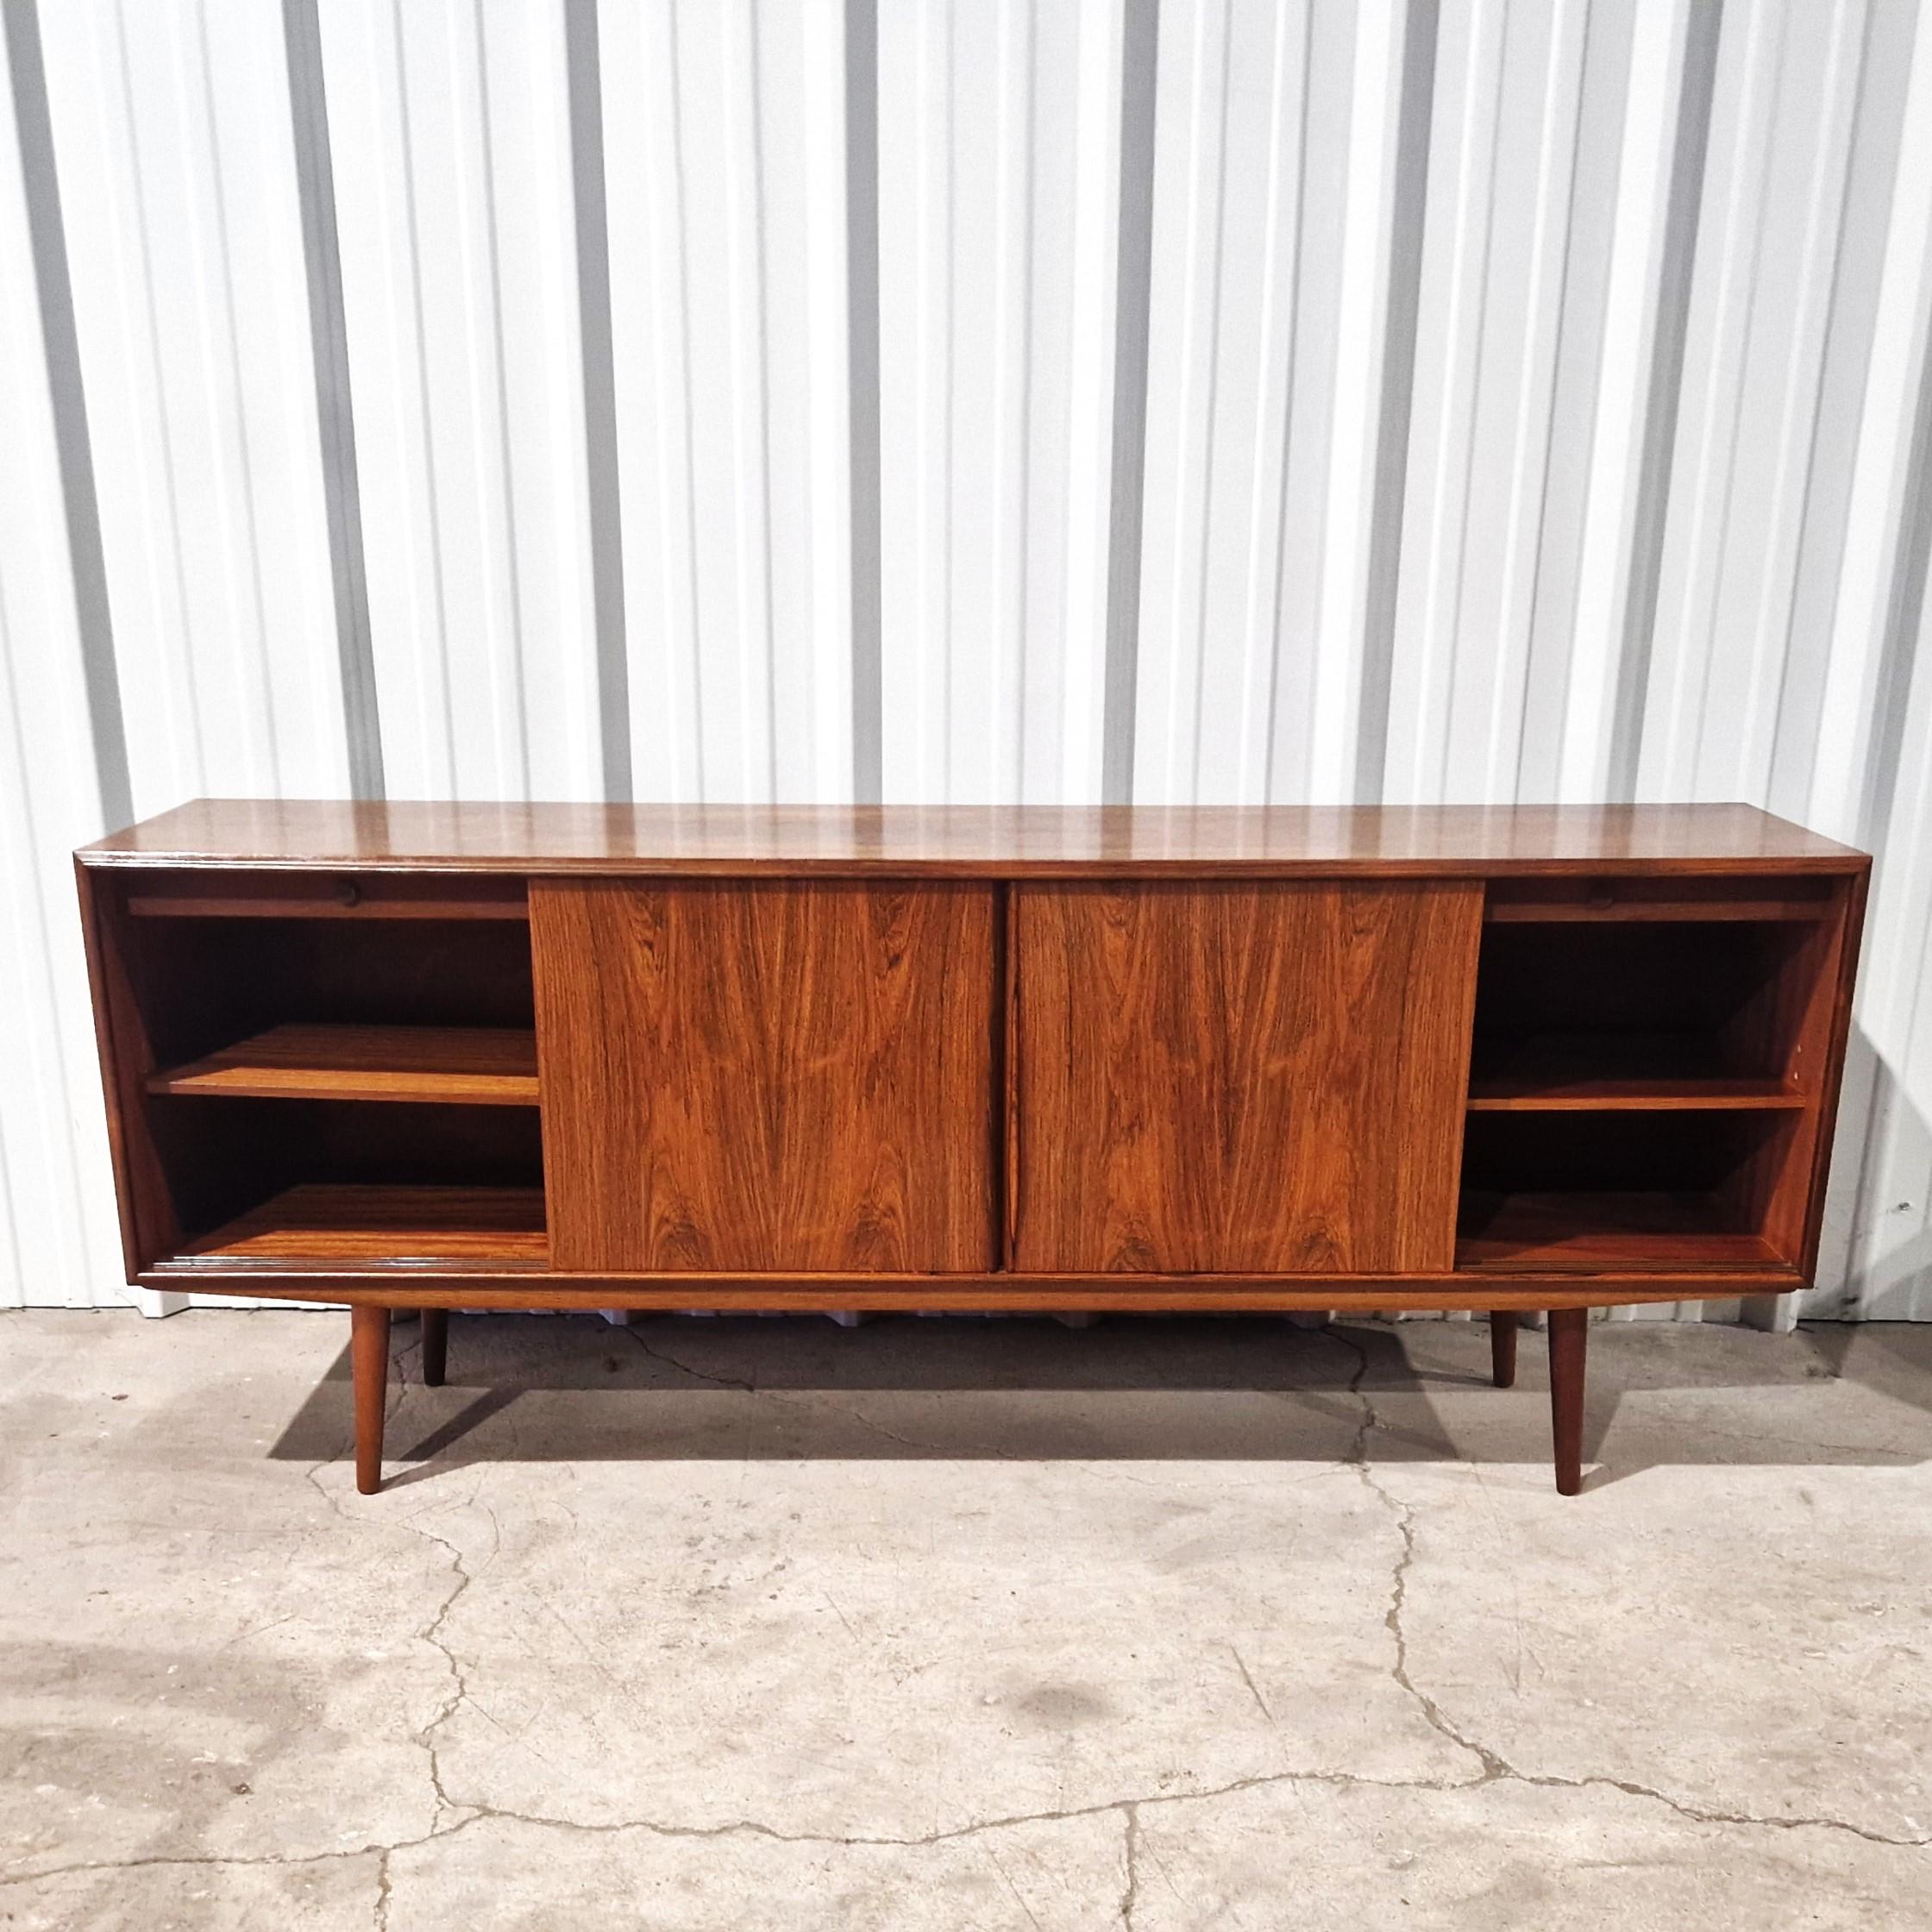 Mid-20th Century Scandinavian Sideboard by E.W. Bach for Sejling Skabe publisher, Denmark, 1960's